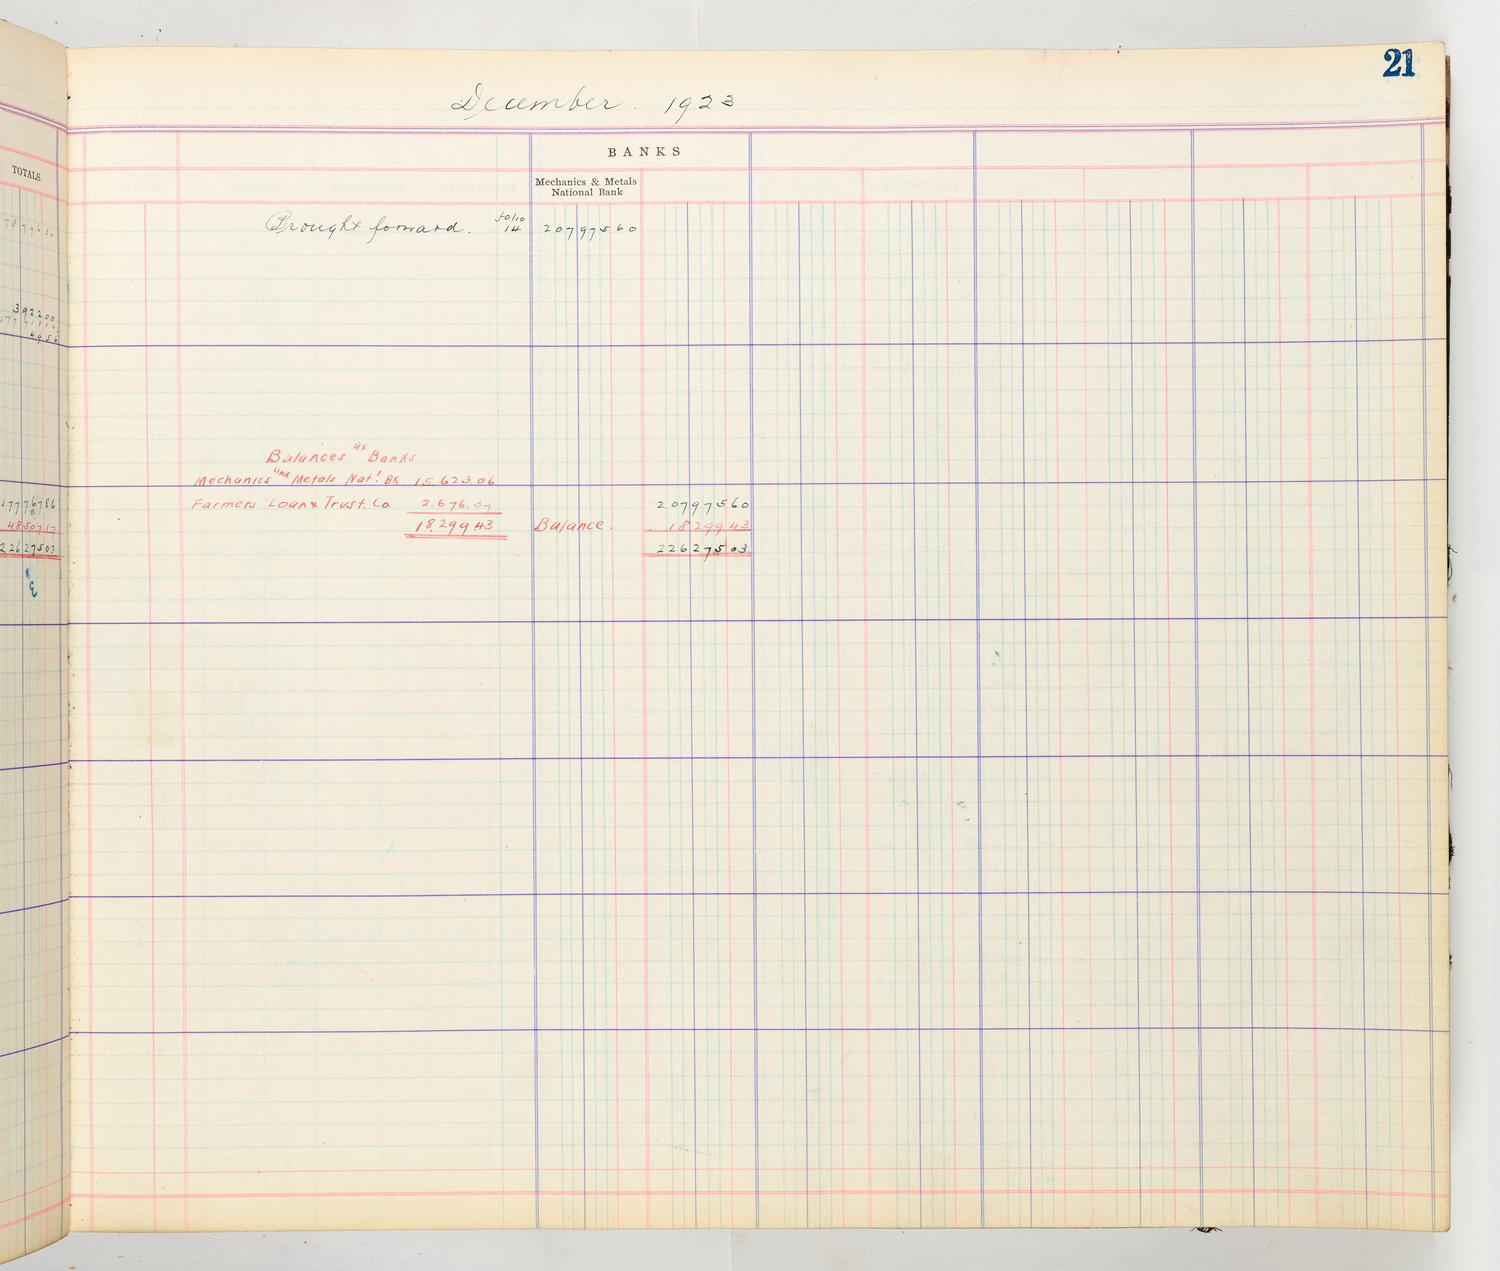 Music Hall Accounting Ledger Cash Book, volume 8, page 21b